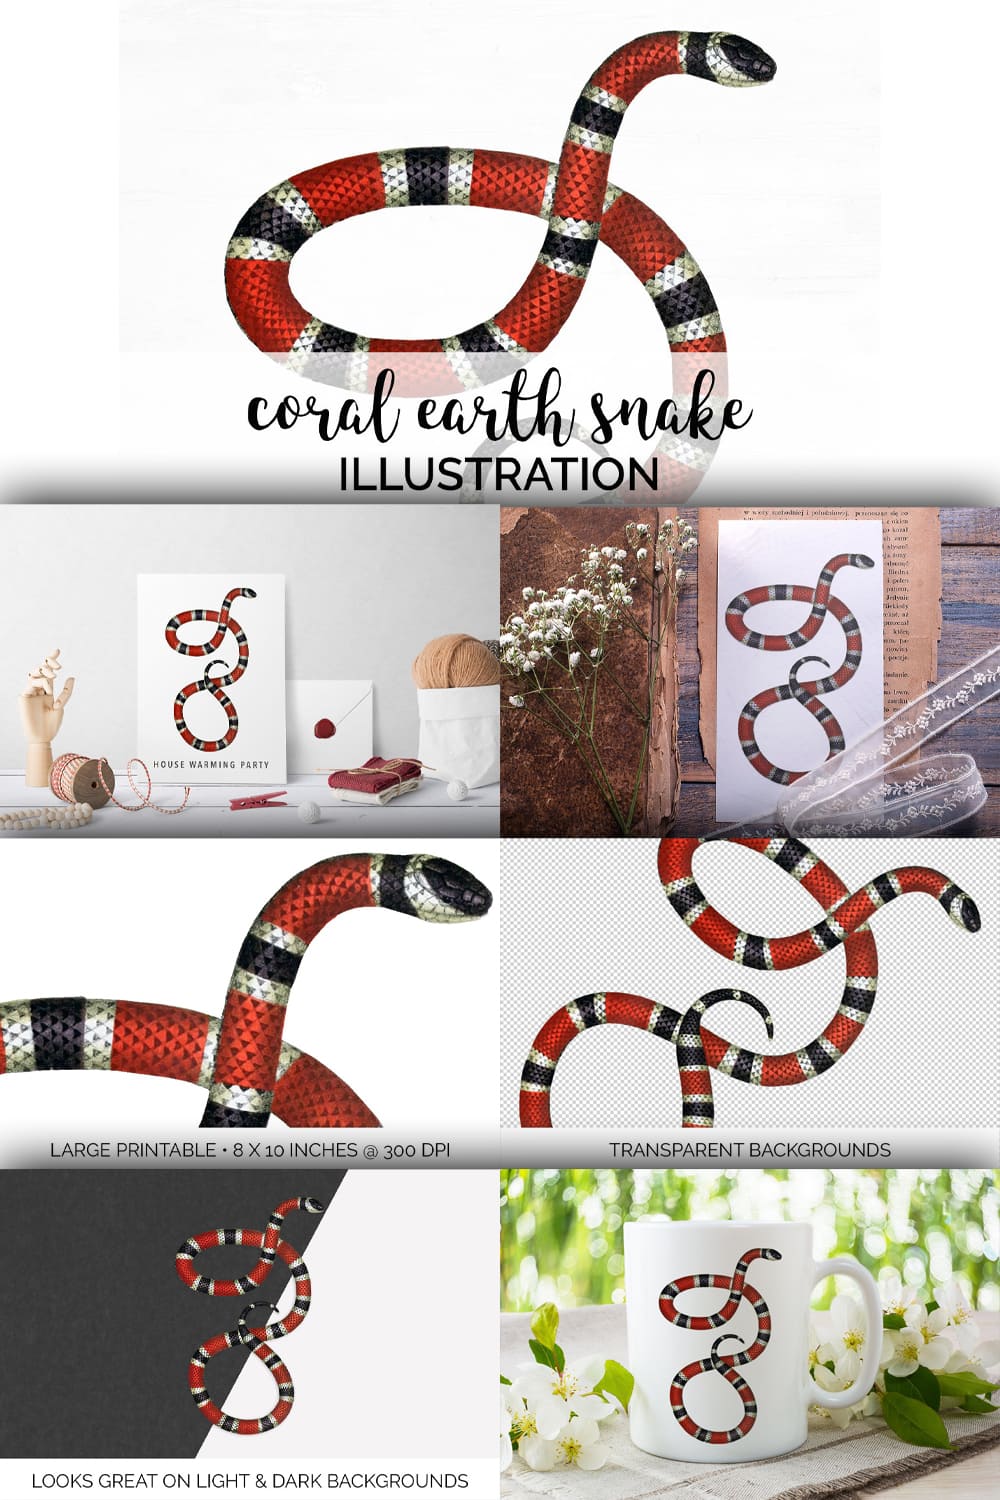 Collection of colorful images coral earth snake.